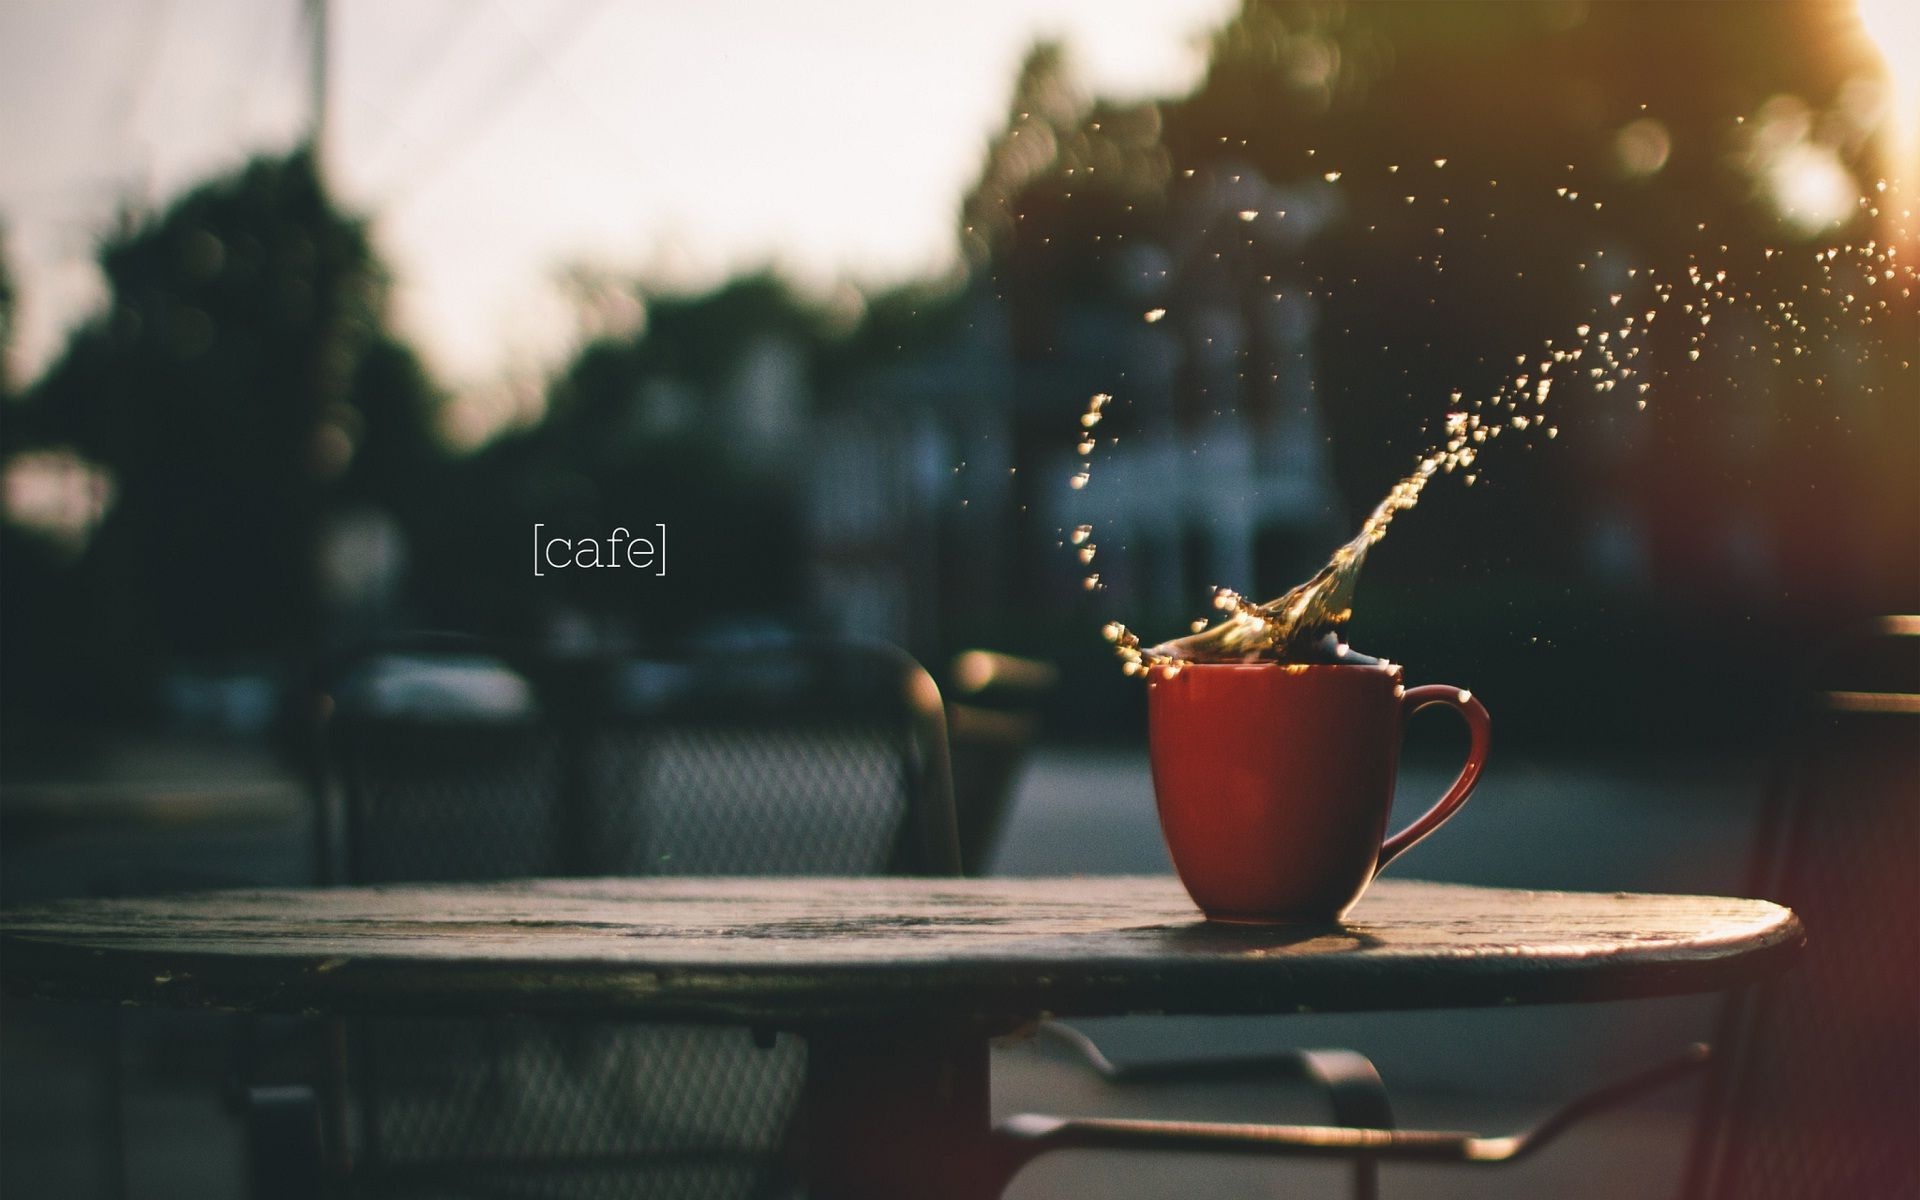 HD cafe wallpapers, Free download, Cozy ambiance, Artistic aesthetics, 1920x1200 HD Desktop